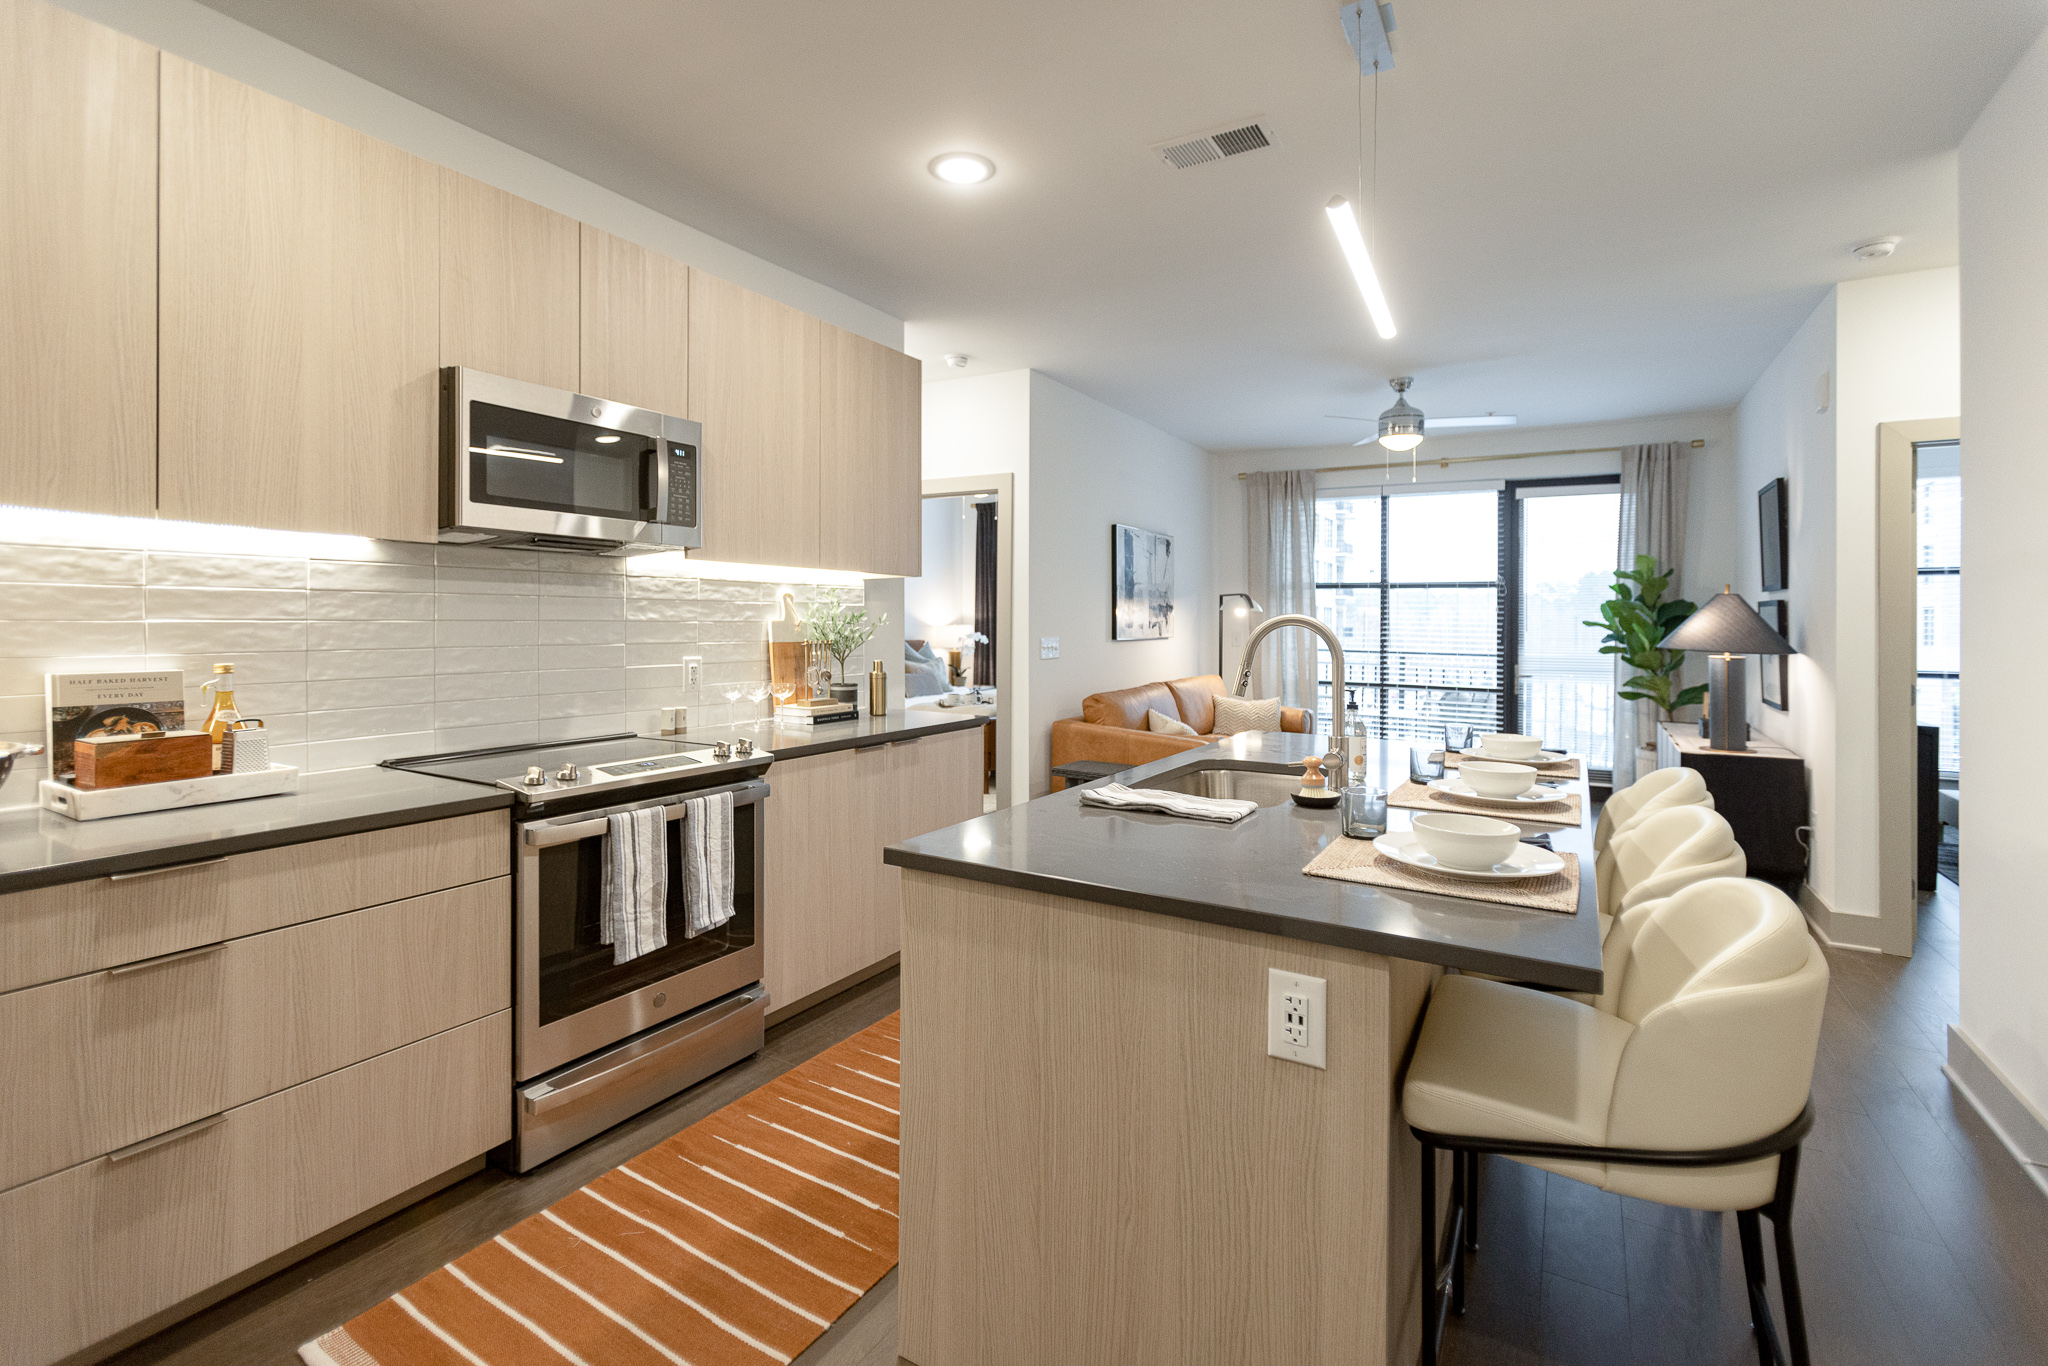 Luxury Apartment Living in Cary, NC - The Allison at Fenton